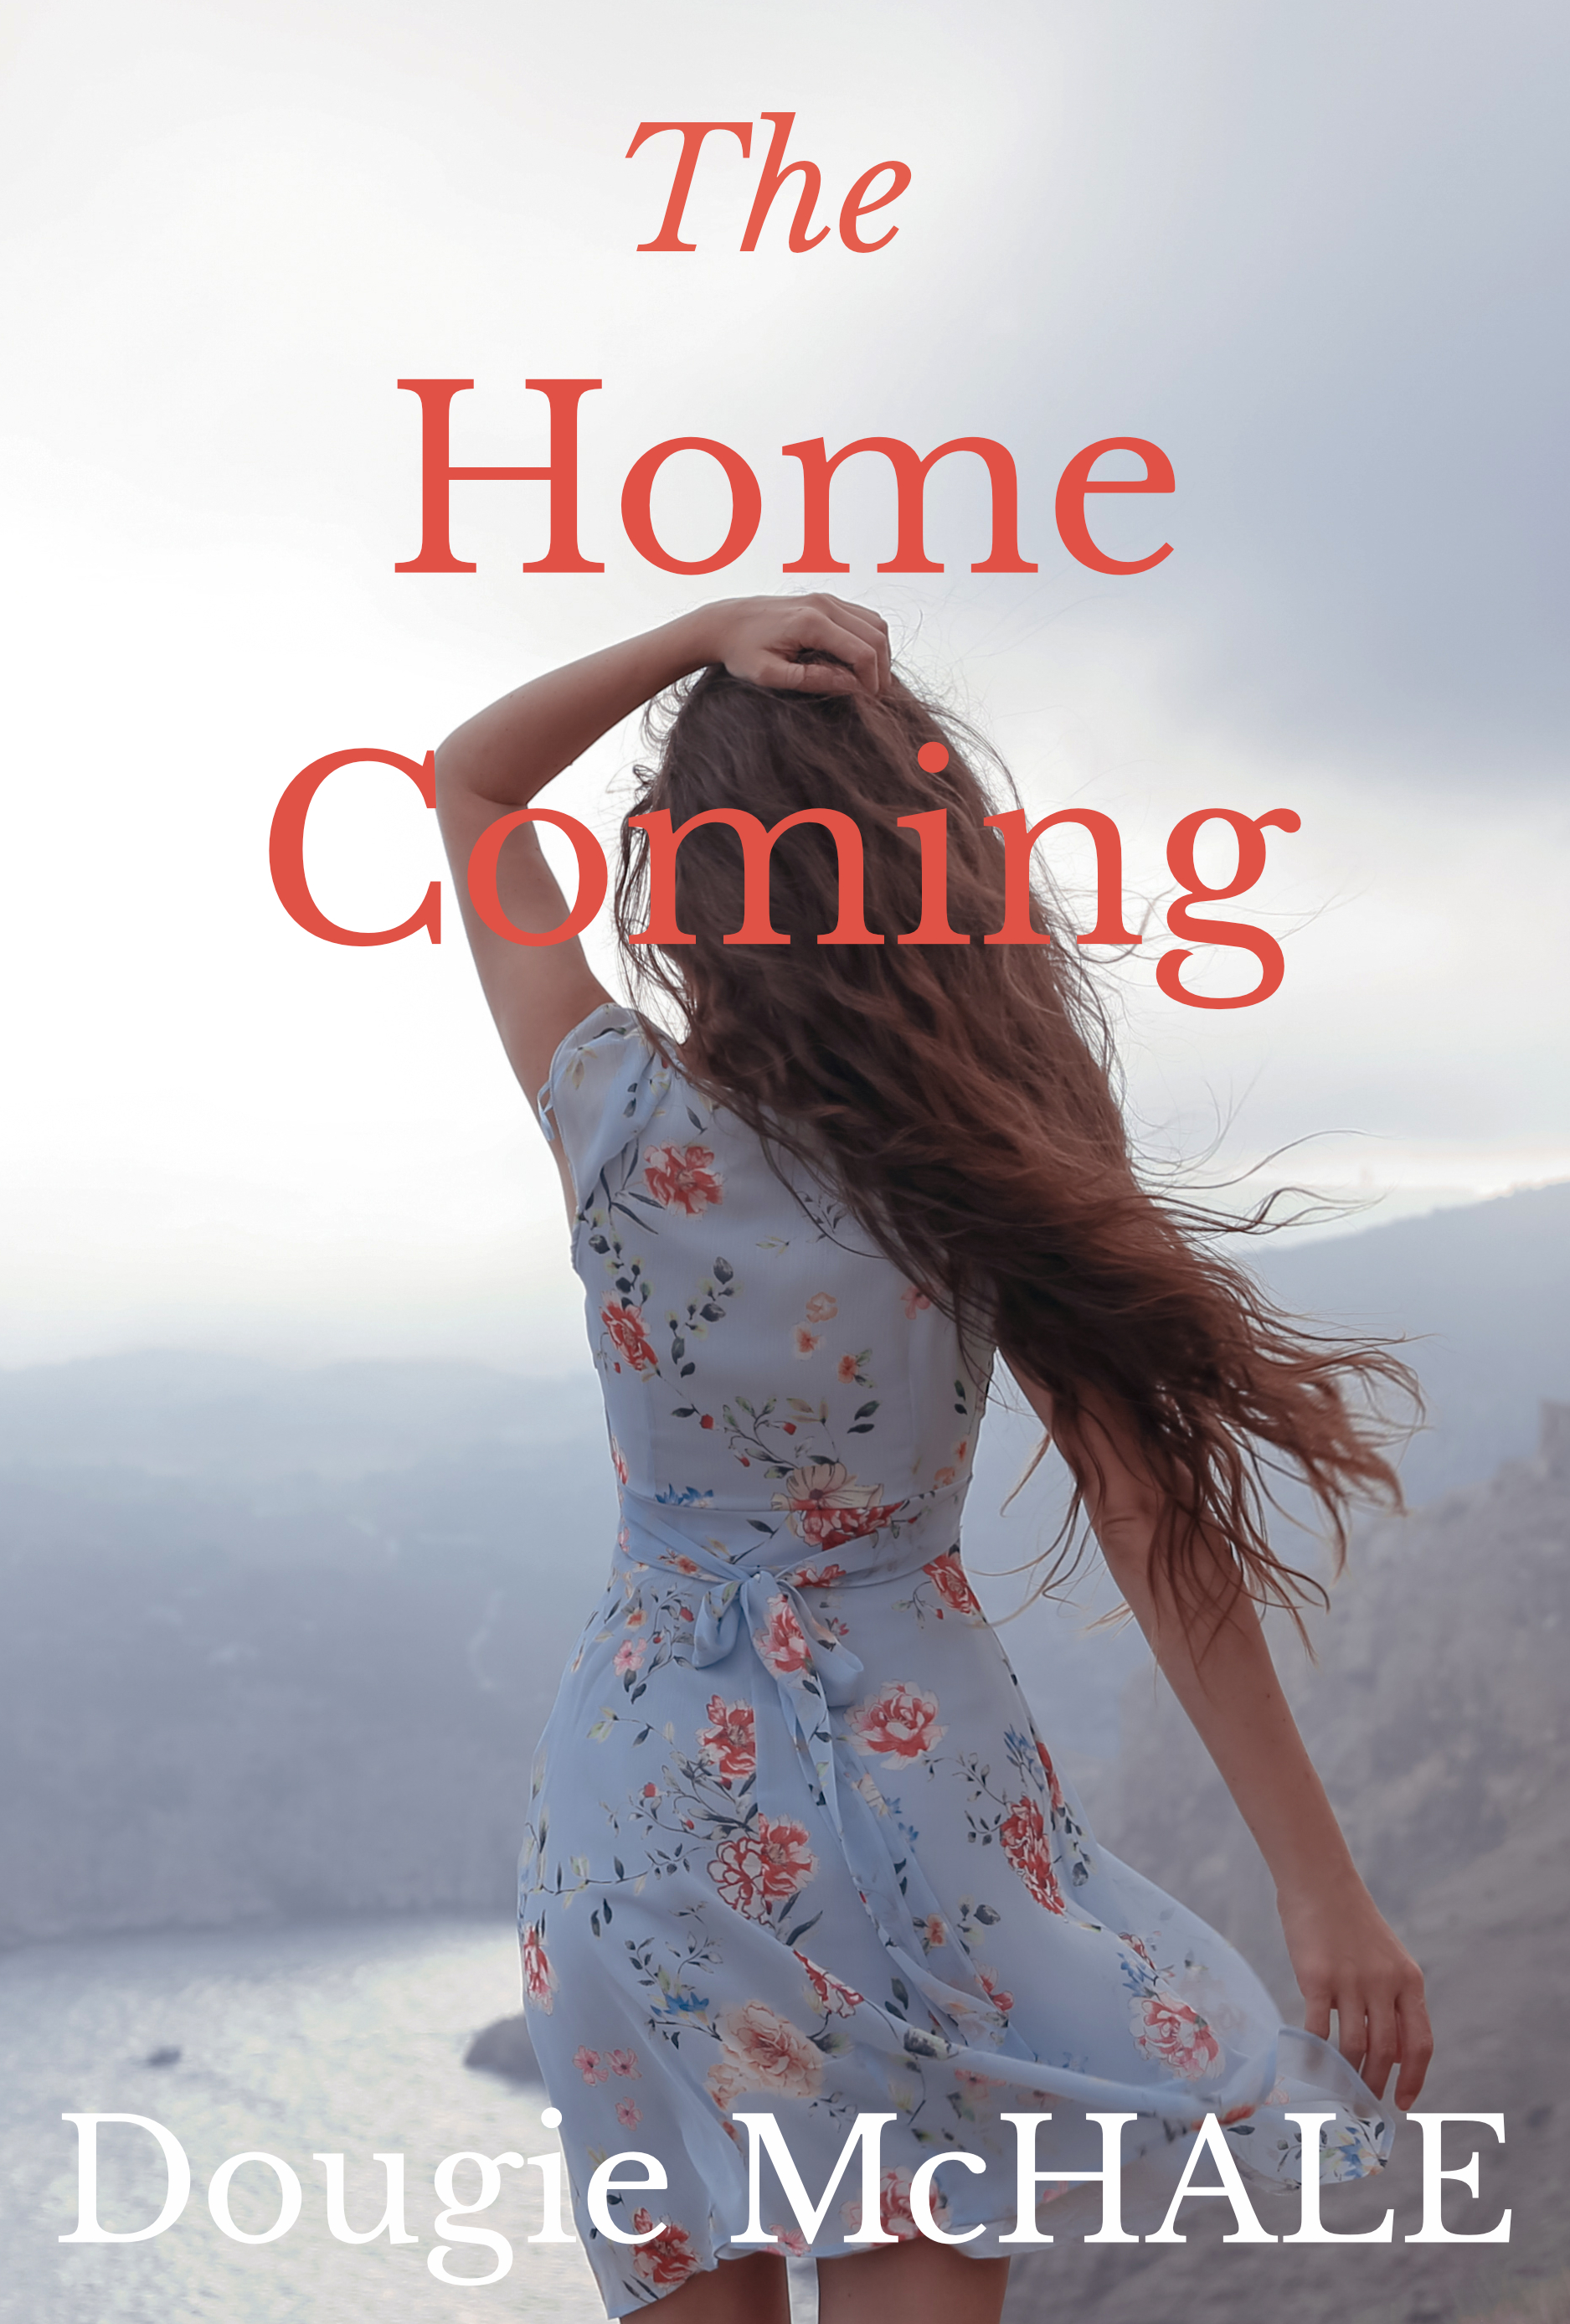 The Homecoming book cover